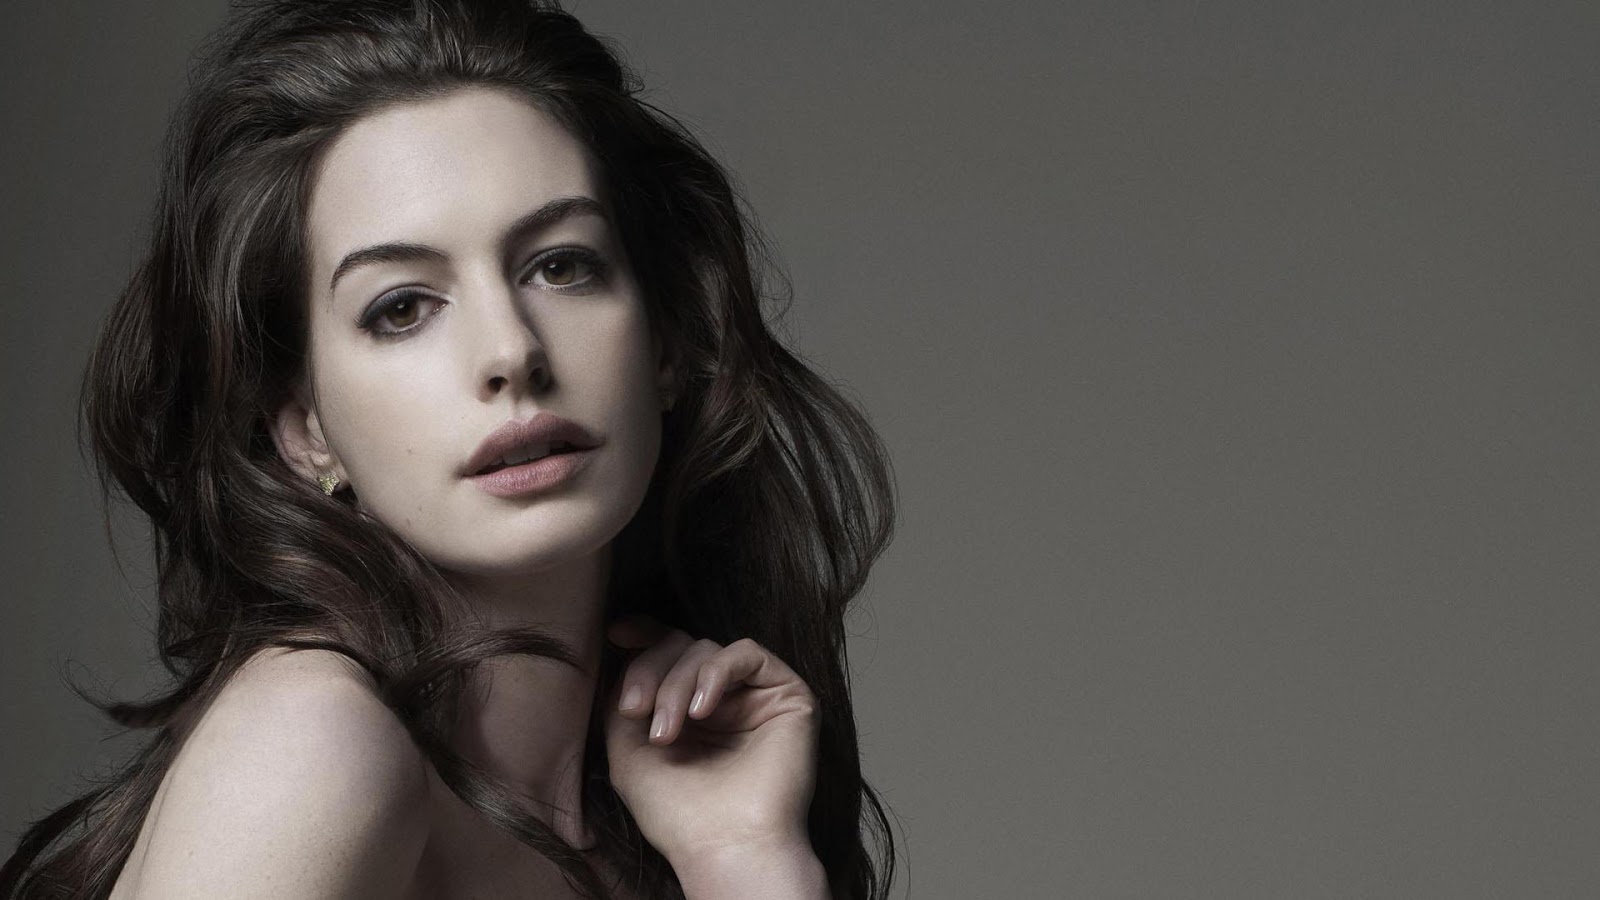 Anne Hathaway HD Images and Wallpapers - Hollywood Actress